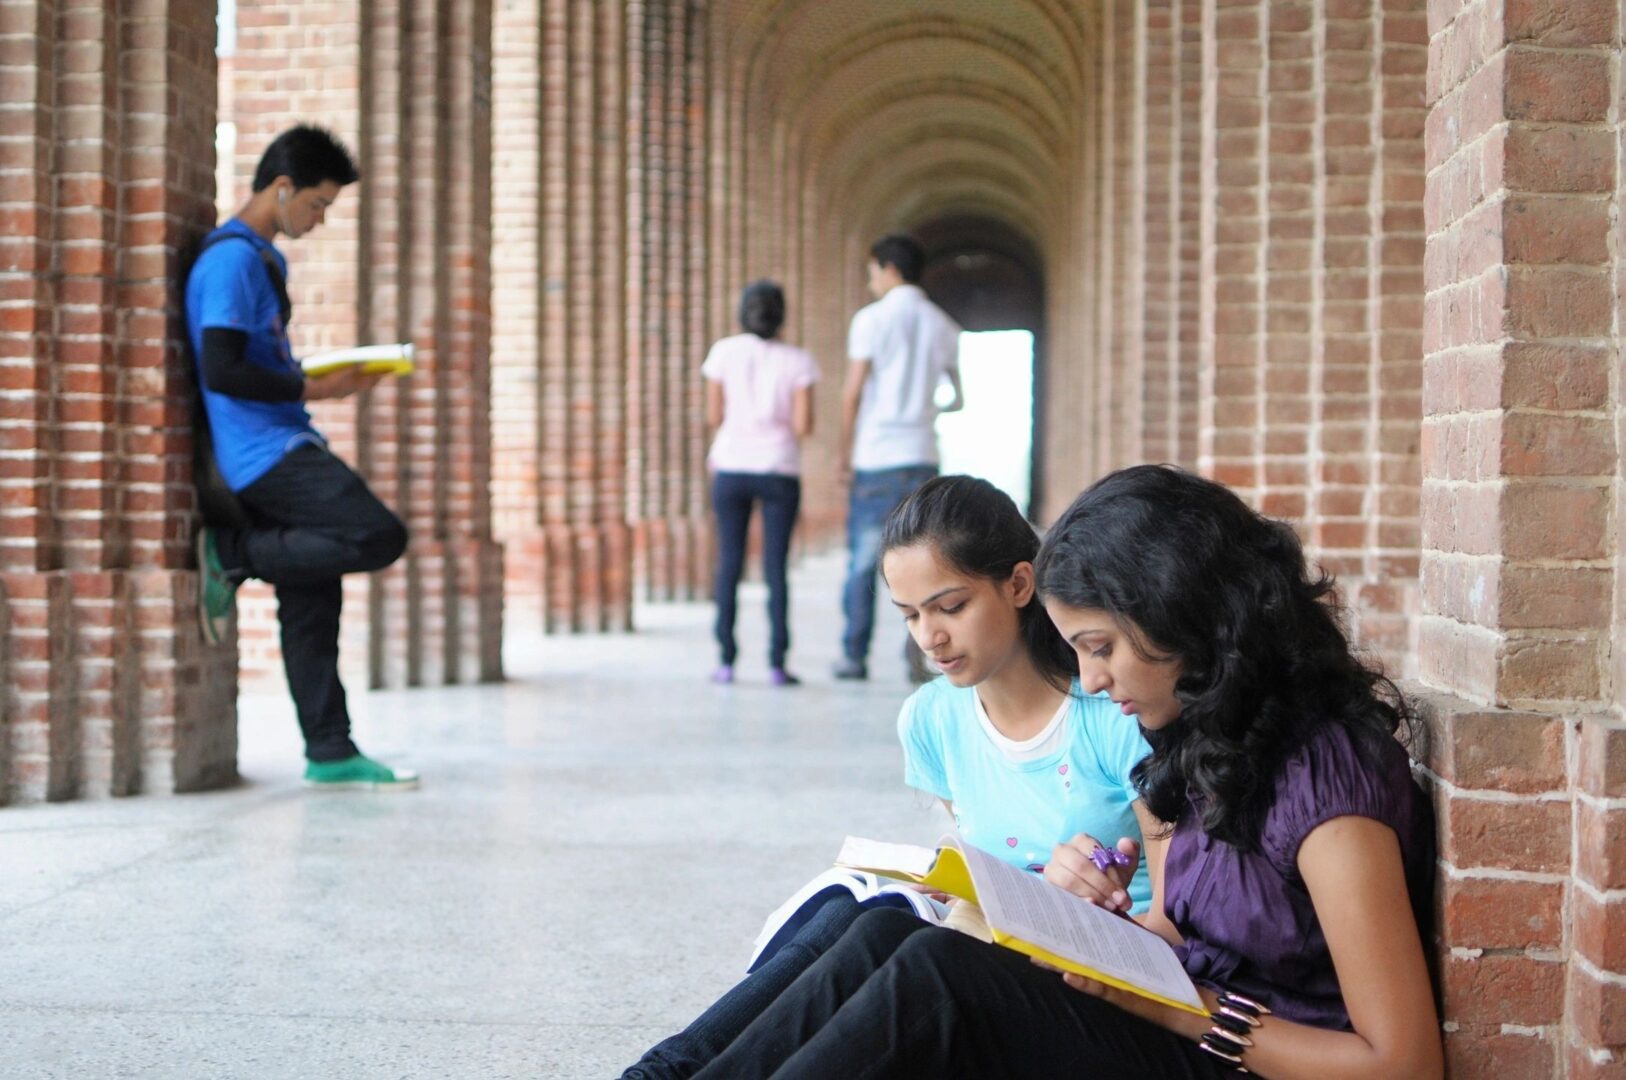 Two students are sitting on the floor reading.